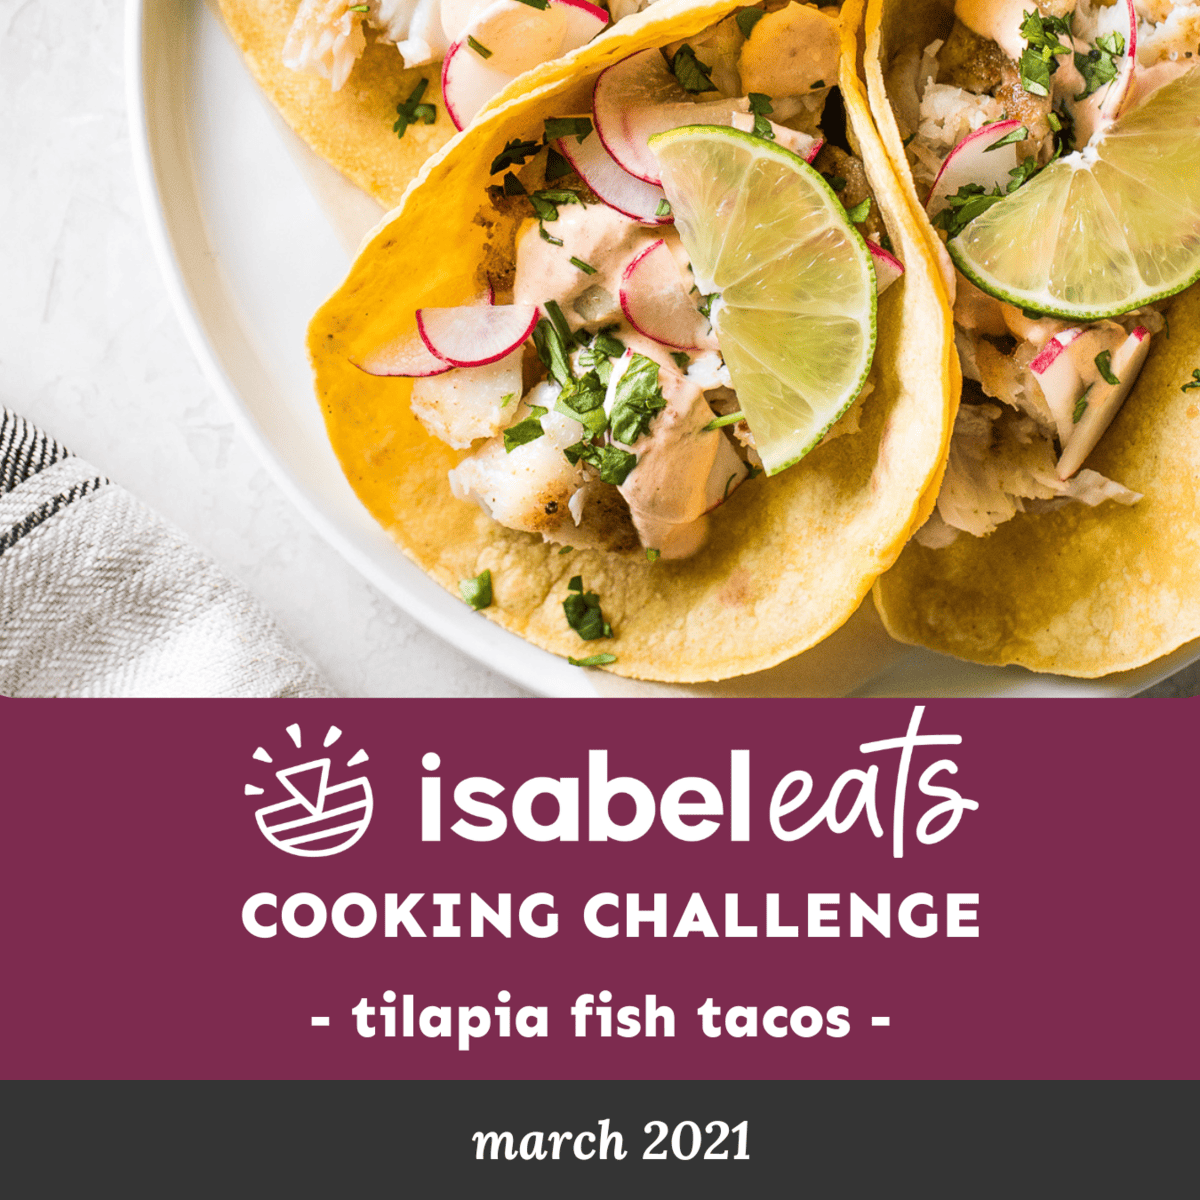 Introducing: The Isabel Eats Cooking Challenge